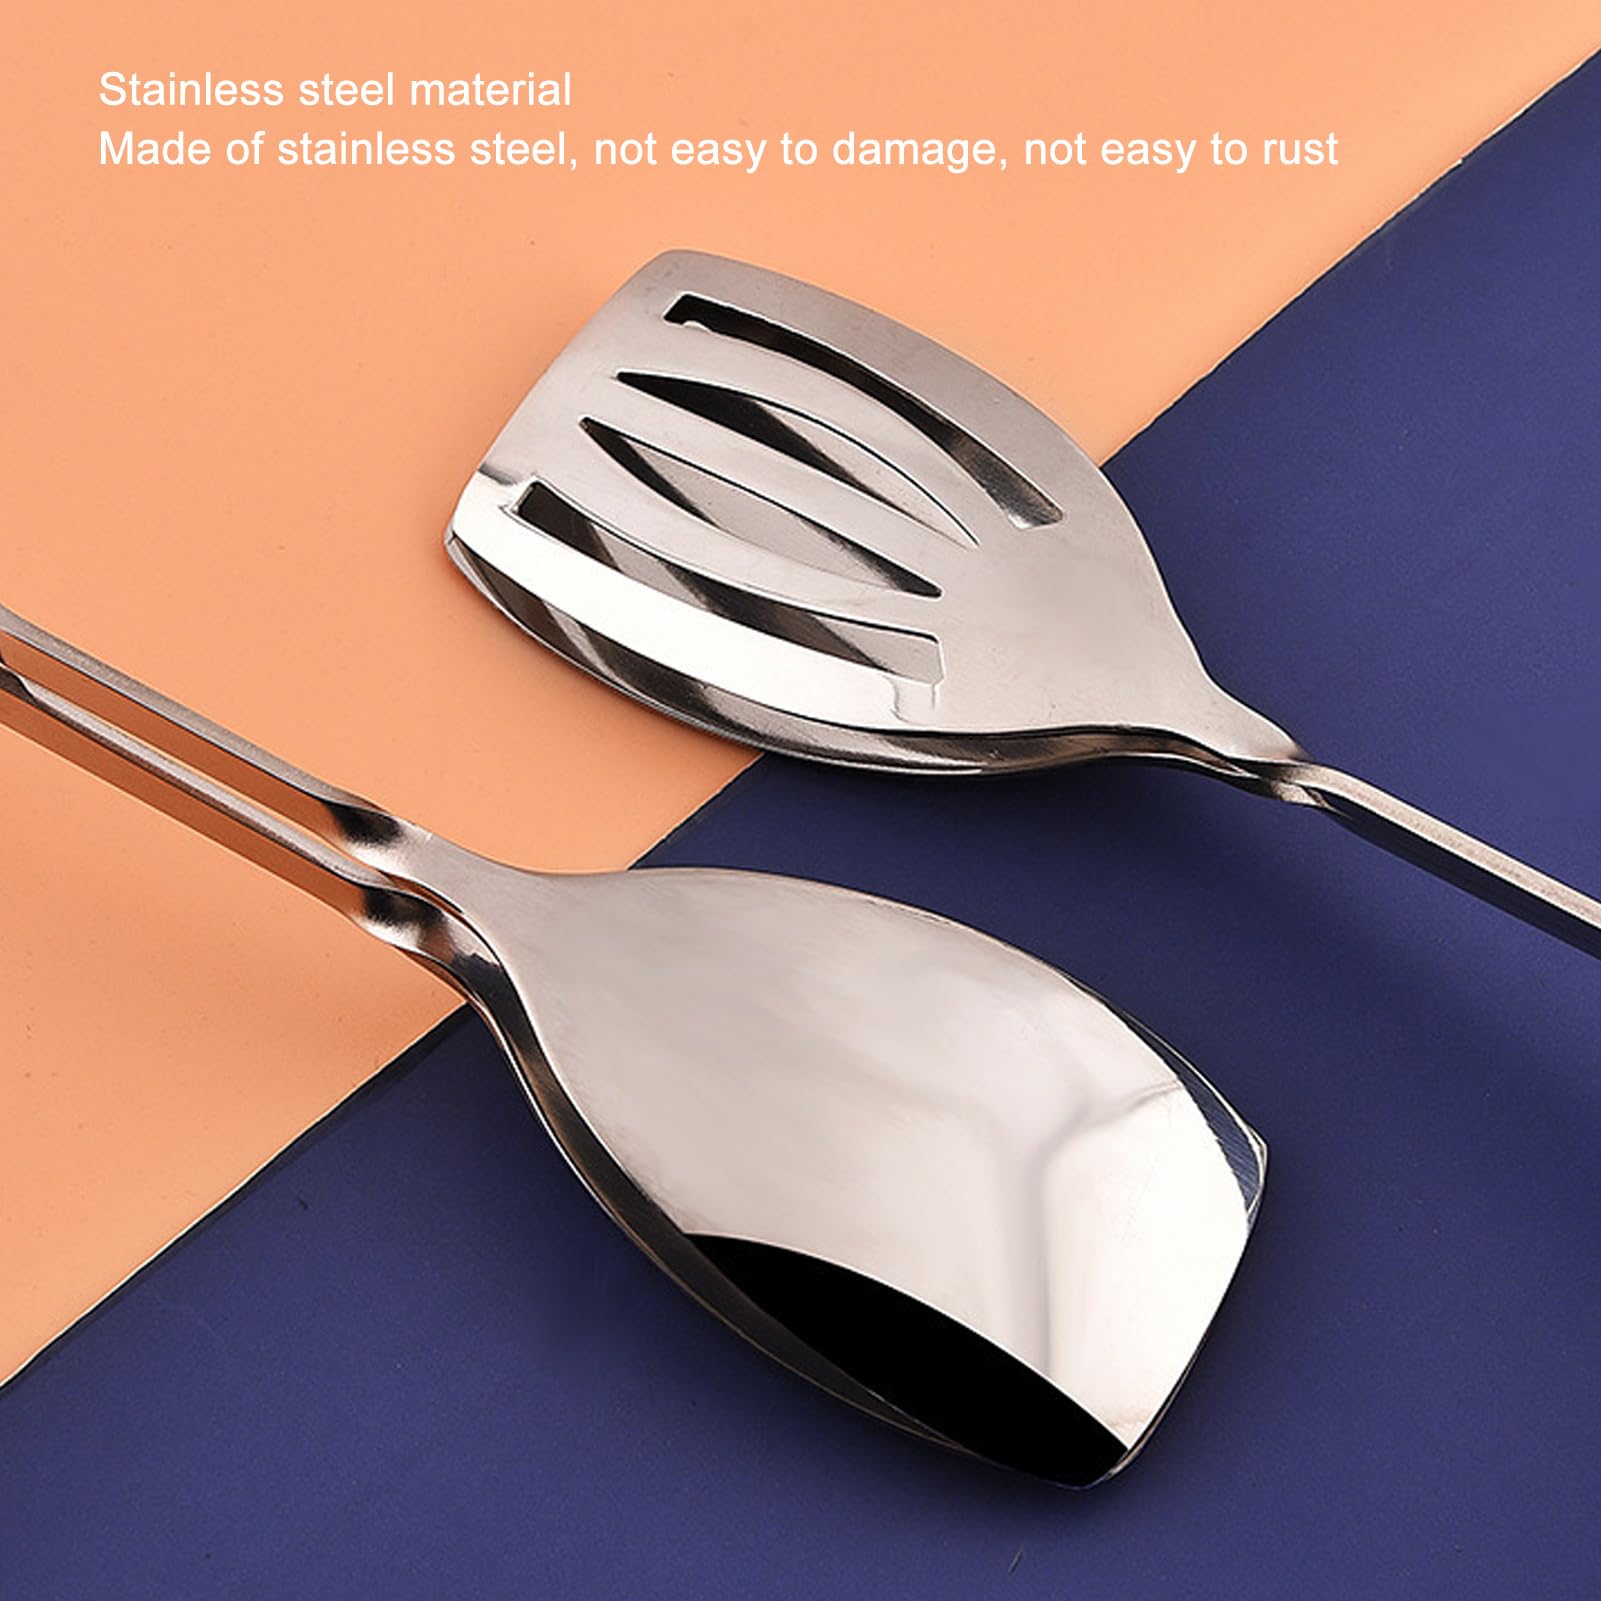 Serving Tongs, 201 Stainless Steel Comfortable Grip Food Tong, Multi Purpose Practical Light Weight Serving Utensils for Home Kitchen(Cup clamp)